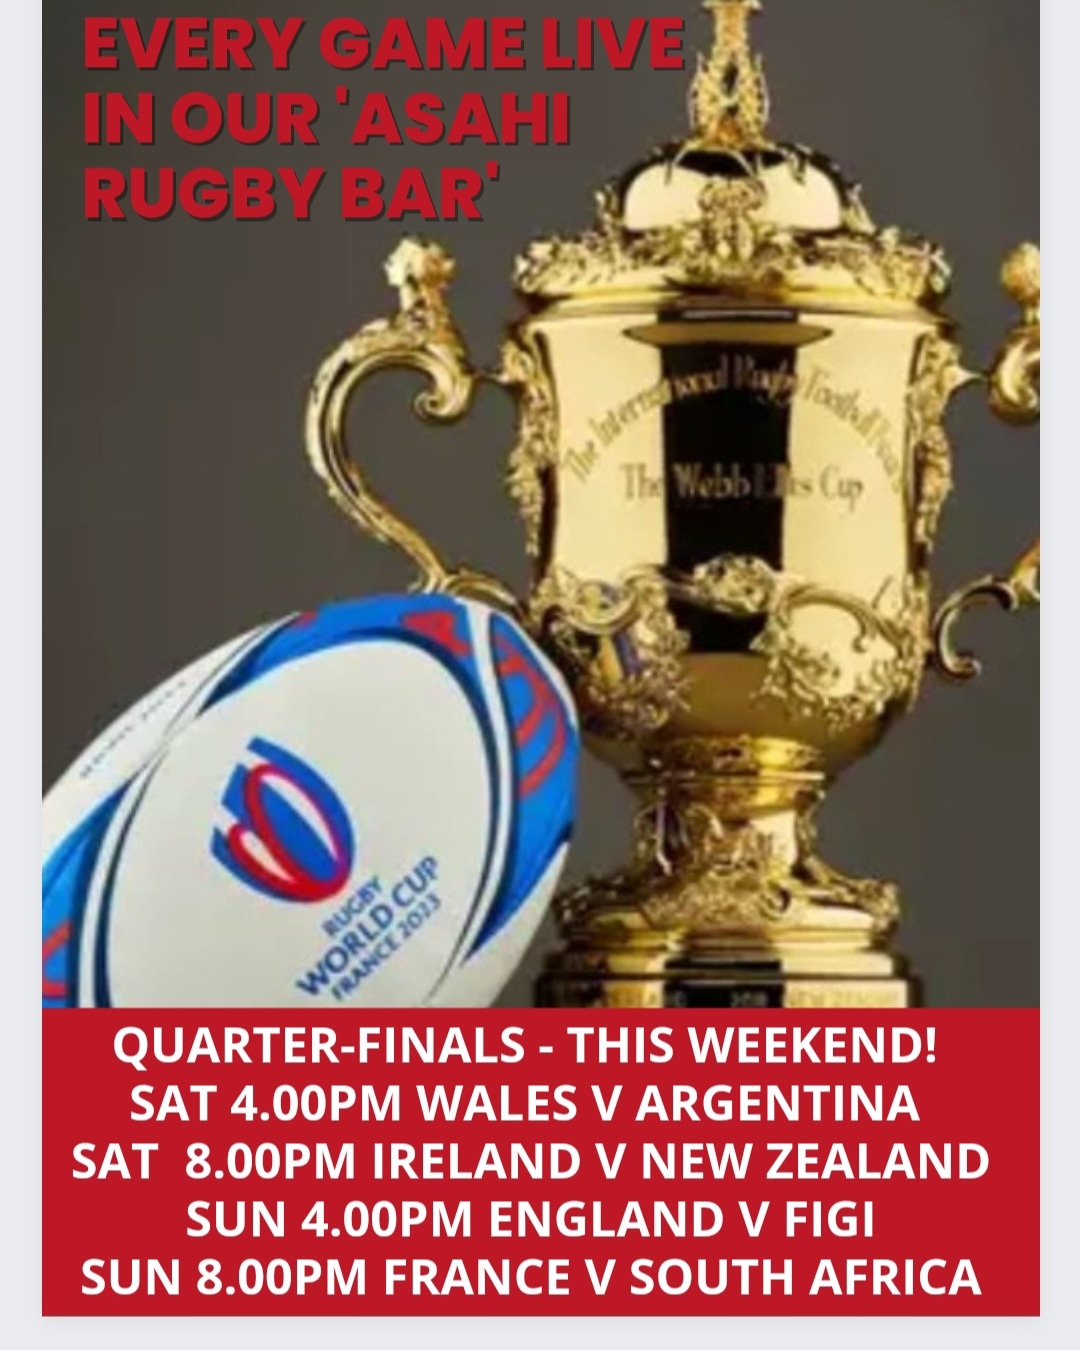 Live Rugby World Cup on TV at The Oak Inn Staplow Ledbury, Herefordshire